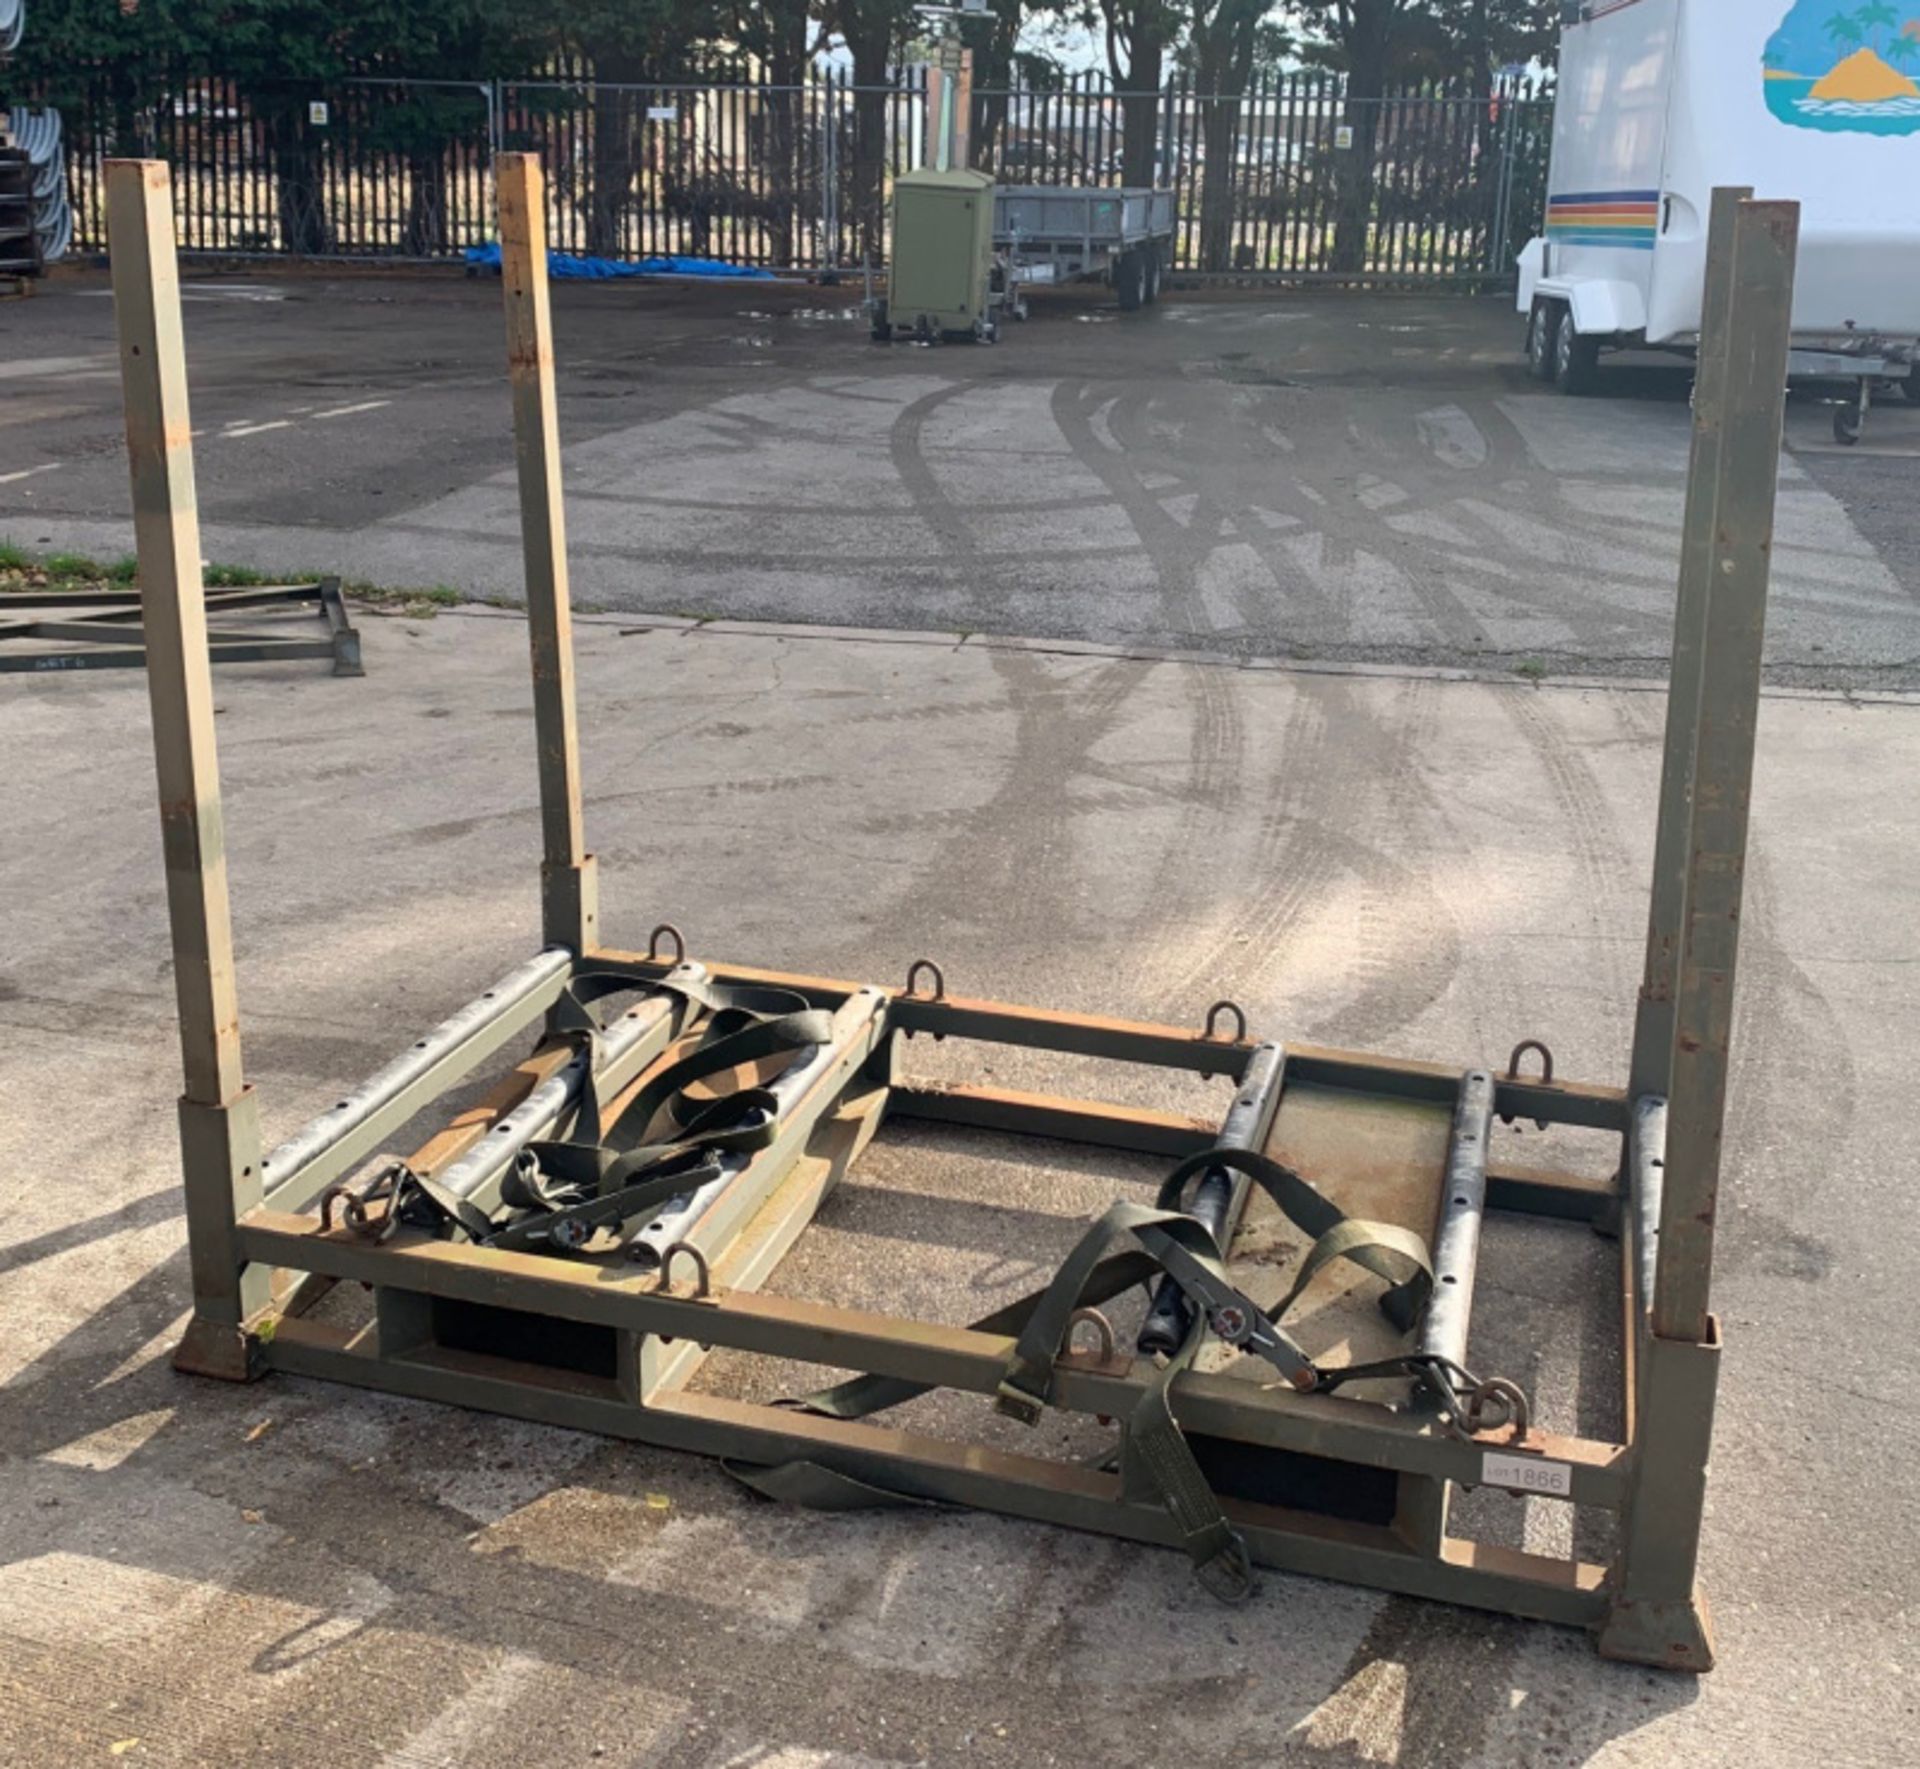 Ex-MOD 6' x 3' Stillages with c/w straps, posts and top